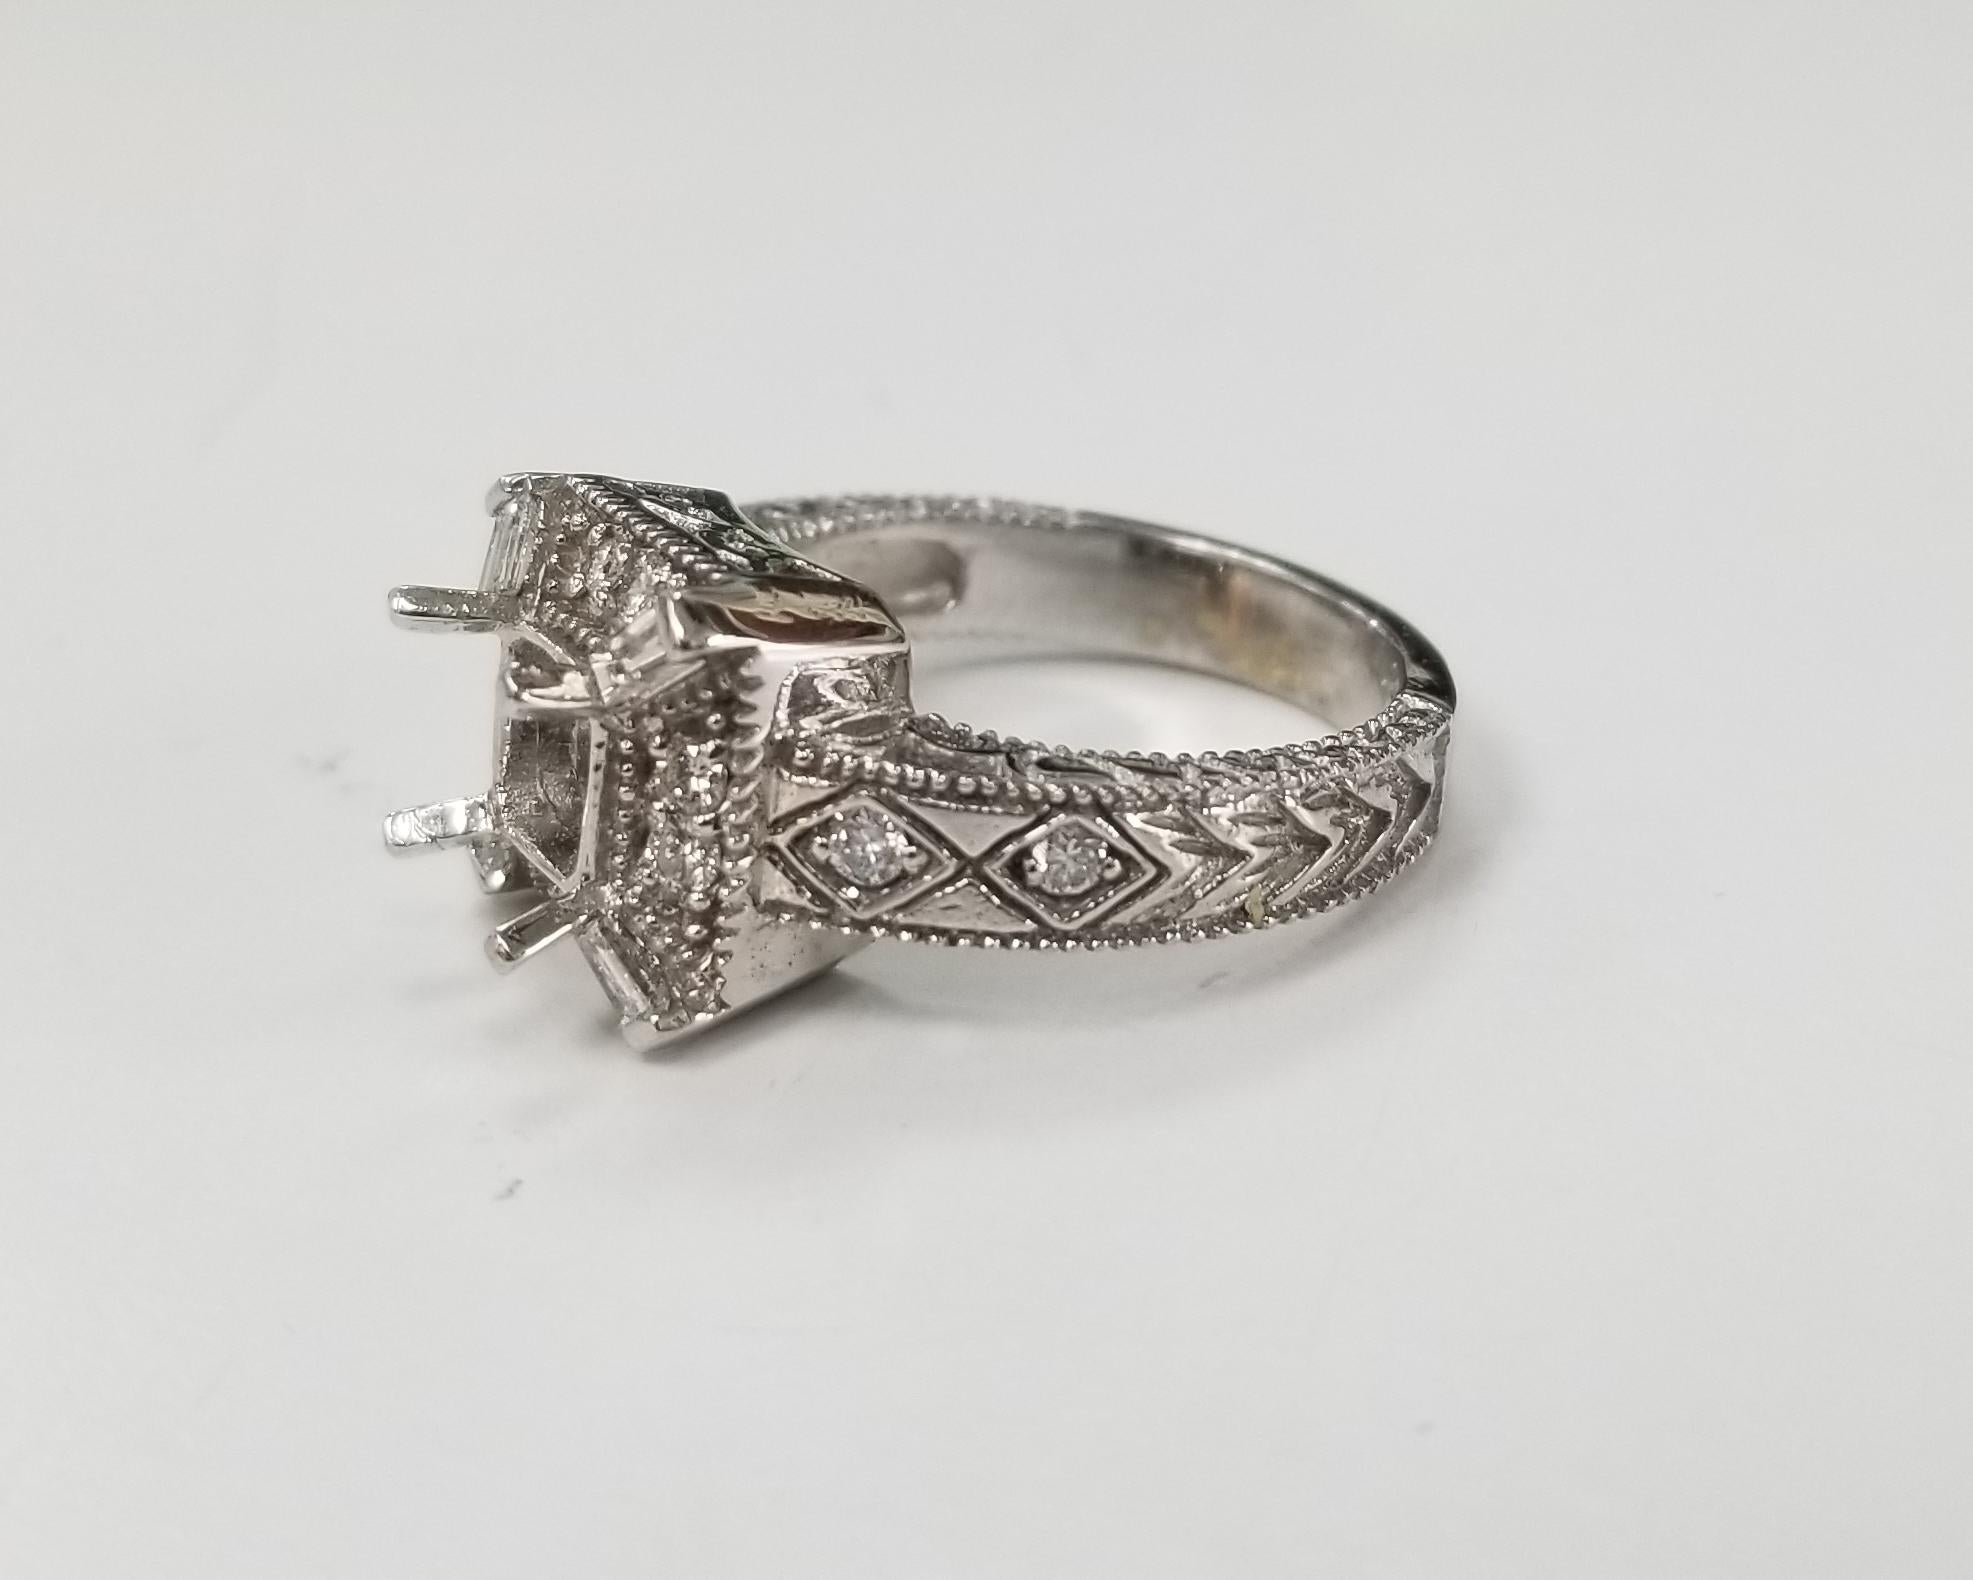 Art Deco inspired 14k with diamonds ring with hand engraving, containing  diamonds weighing diamonds  12round .45pts.,  the ring is a size 6.75 and can be sized to fit for free. the ring can take 7mm x 7mm stone.